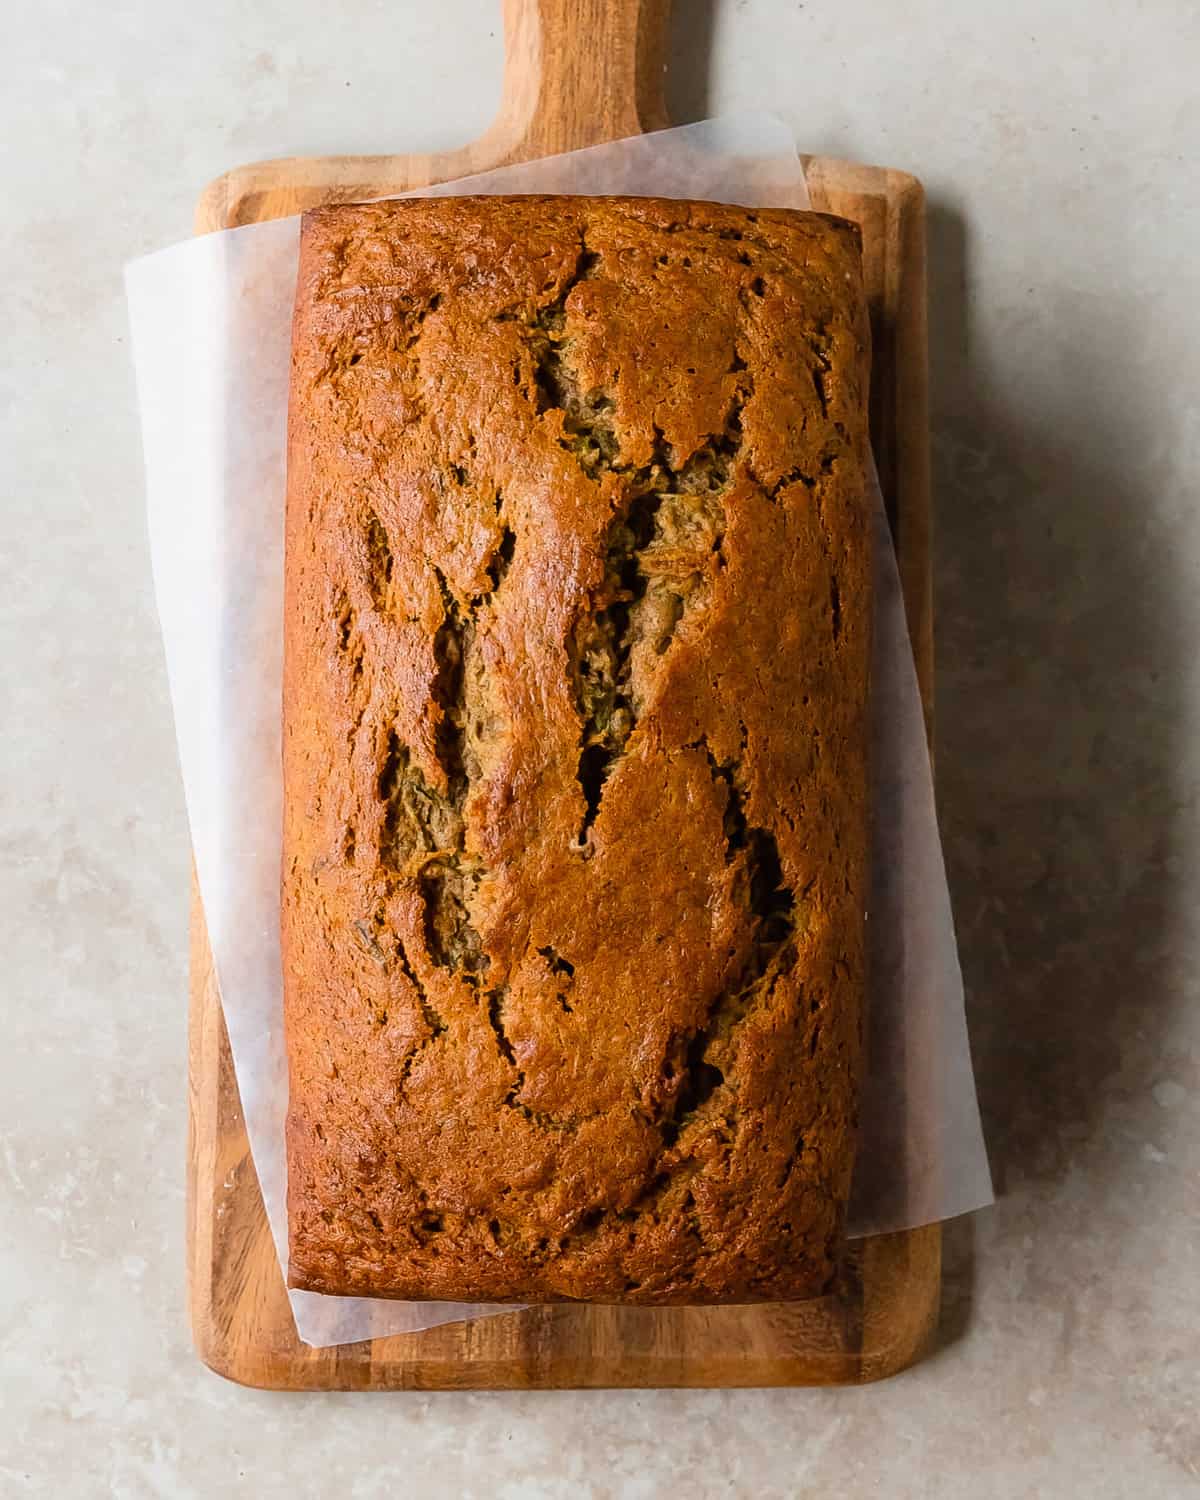 Banana zucchini bread is a sweet and cozy, cinnamon spiced banana bread filled with shredded zucchini. This zucchini banana bread recipe is quick and easy to make and is the perfect breakfast or snack everyone will love. 